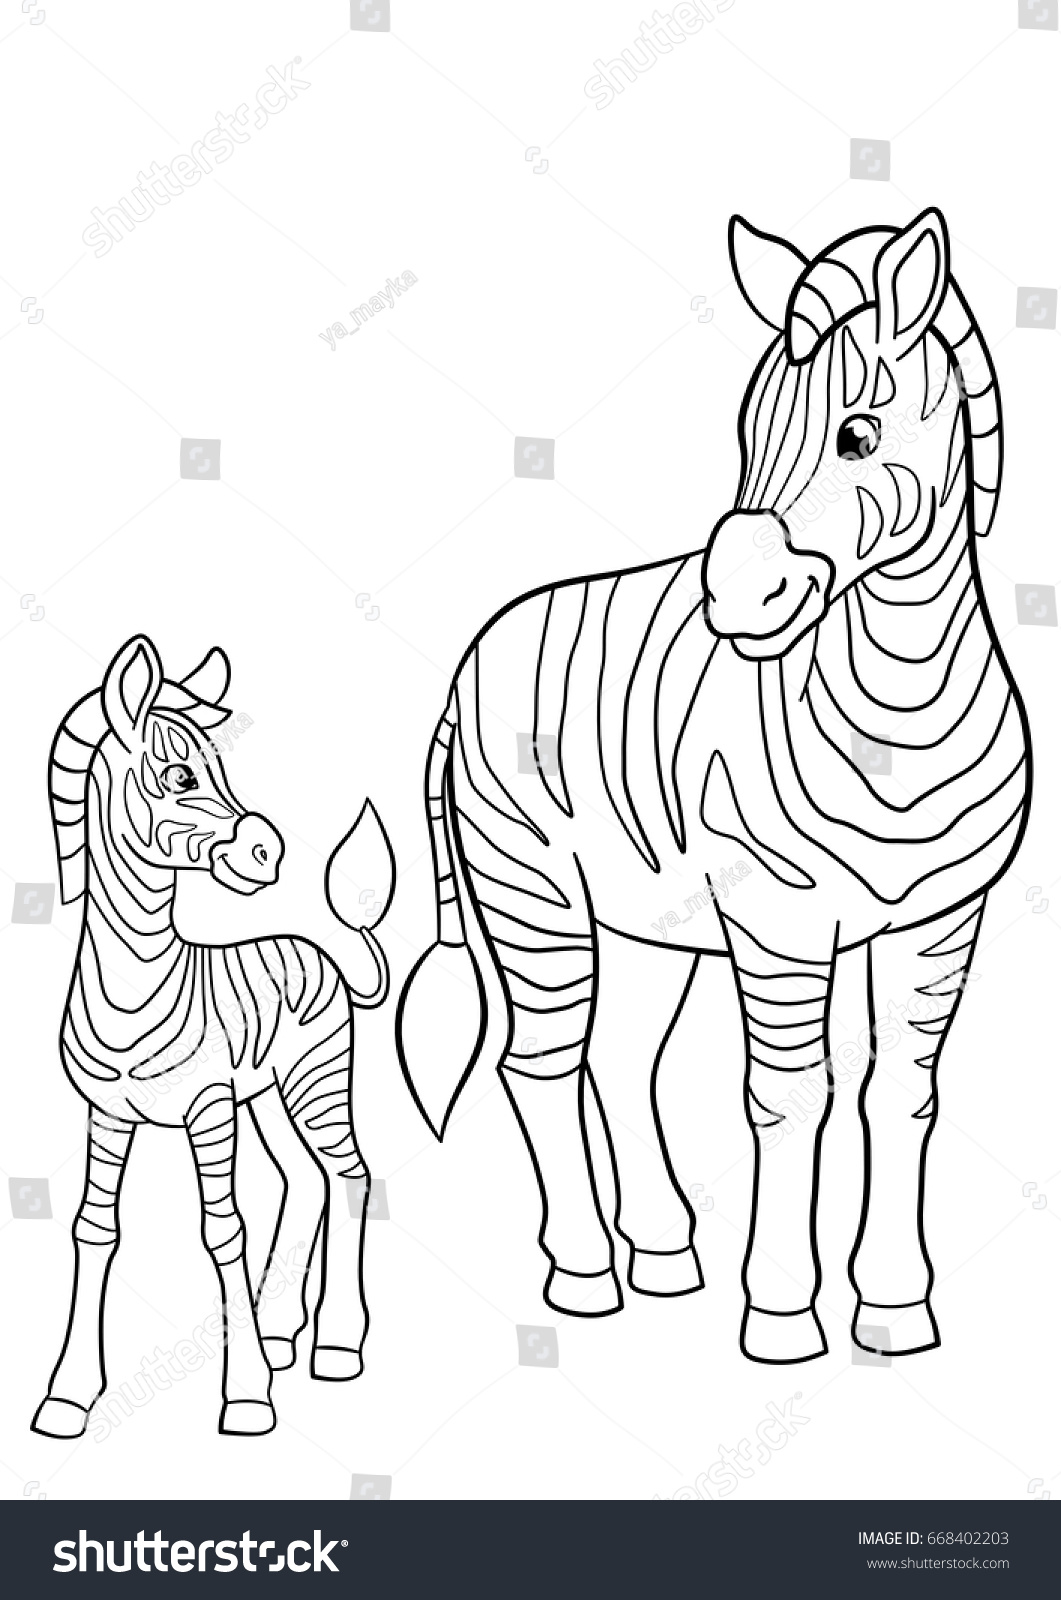 Coloring pages Mother zebra with her little cute baby zebra